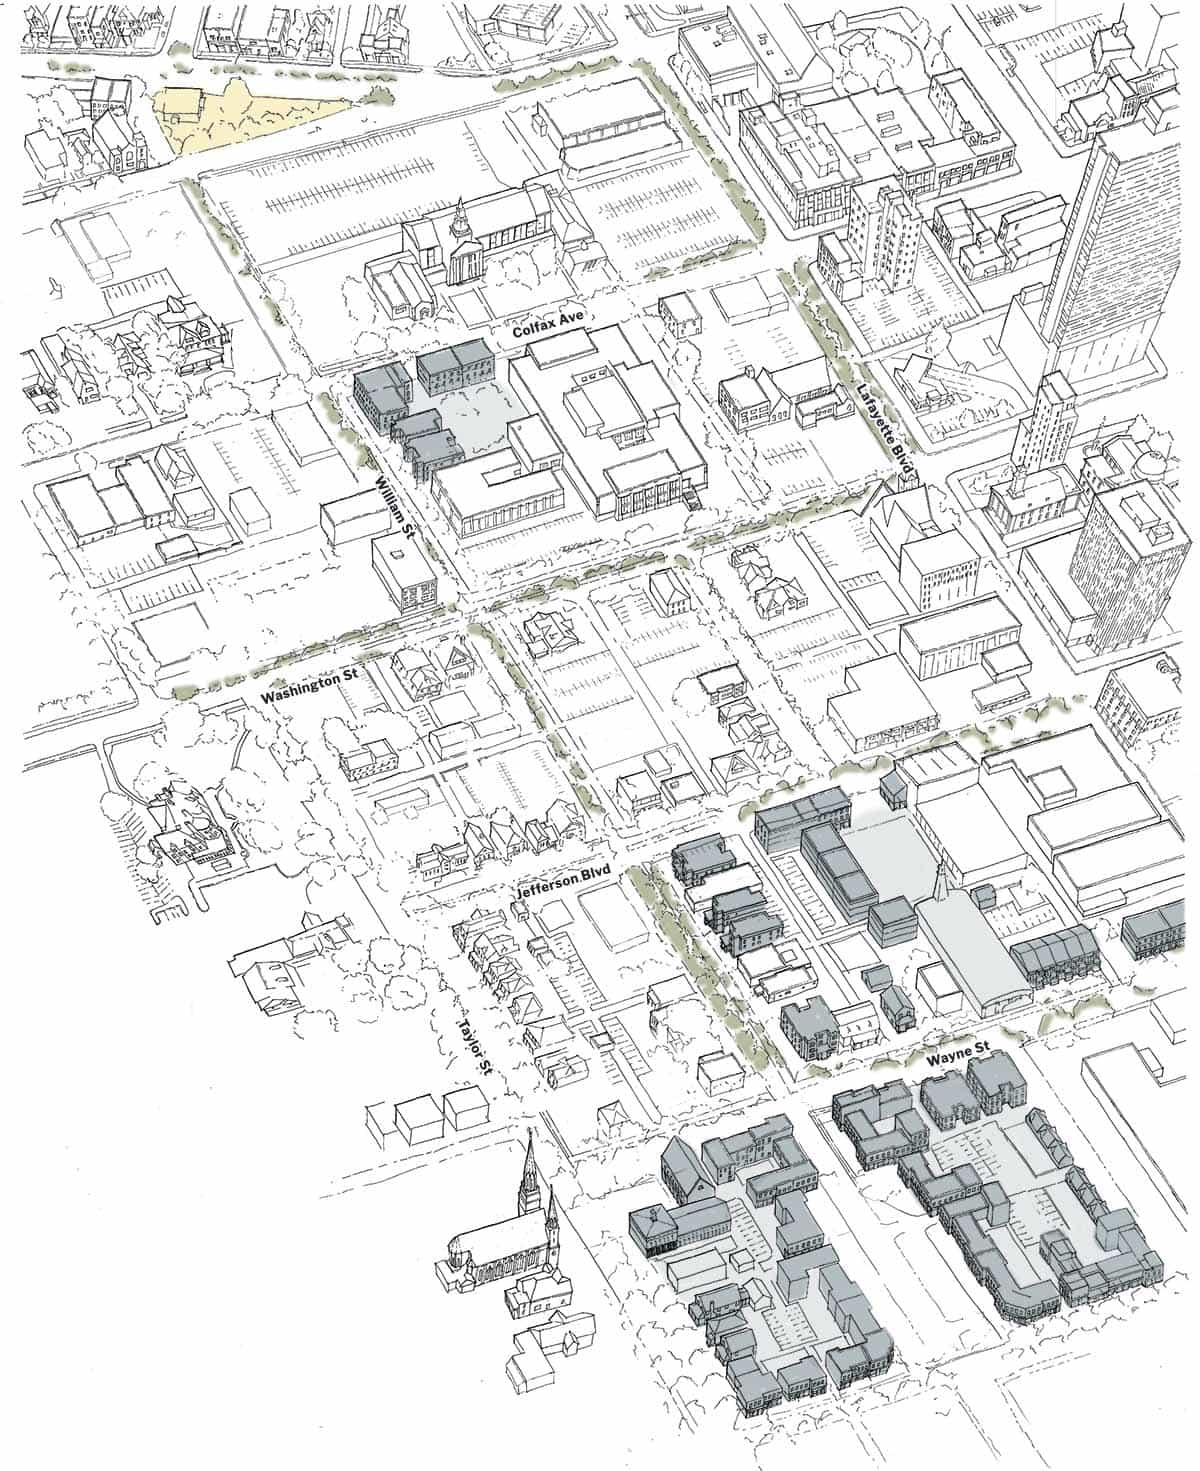 An aerial view drawing of South Bend highlighting a small pocket park north of downtown.